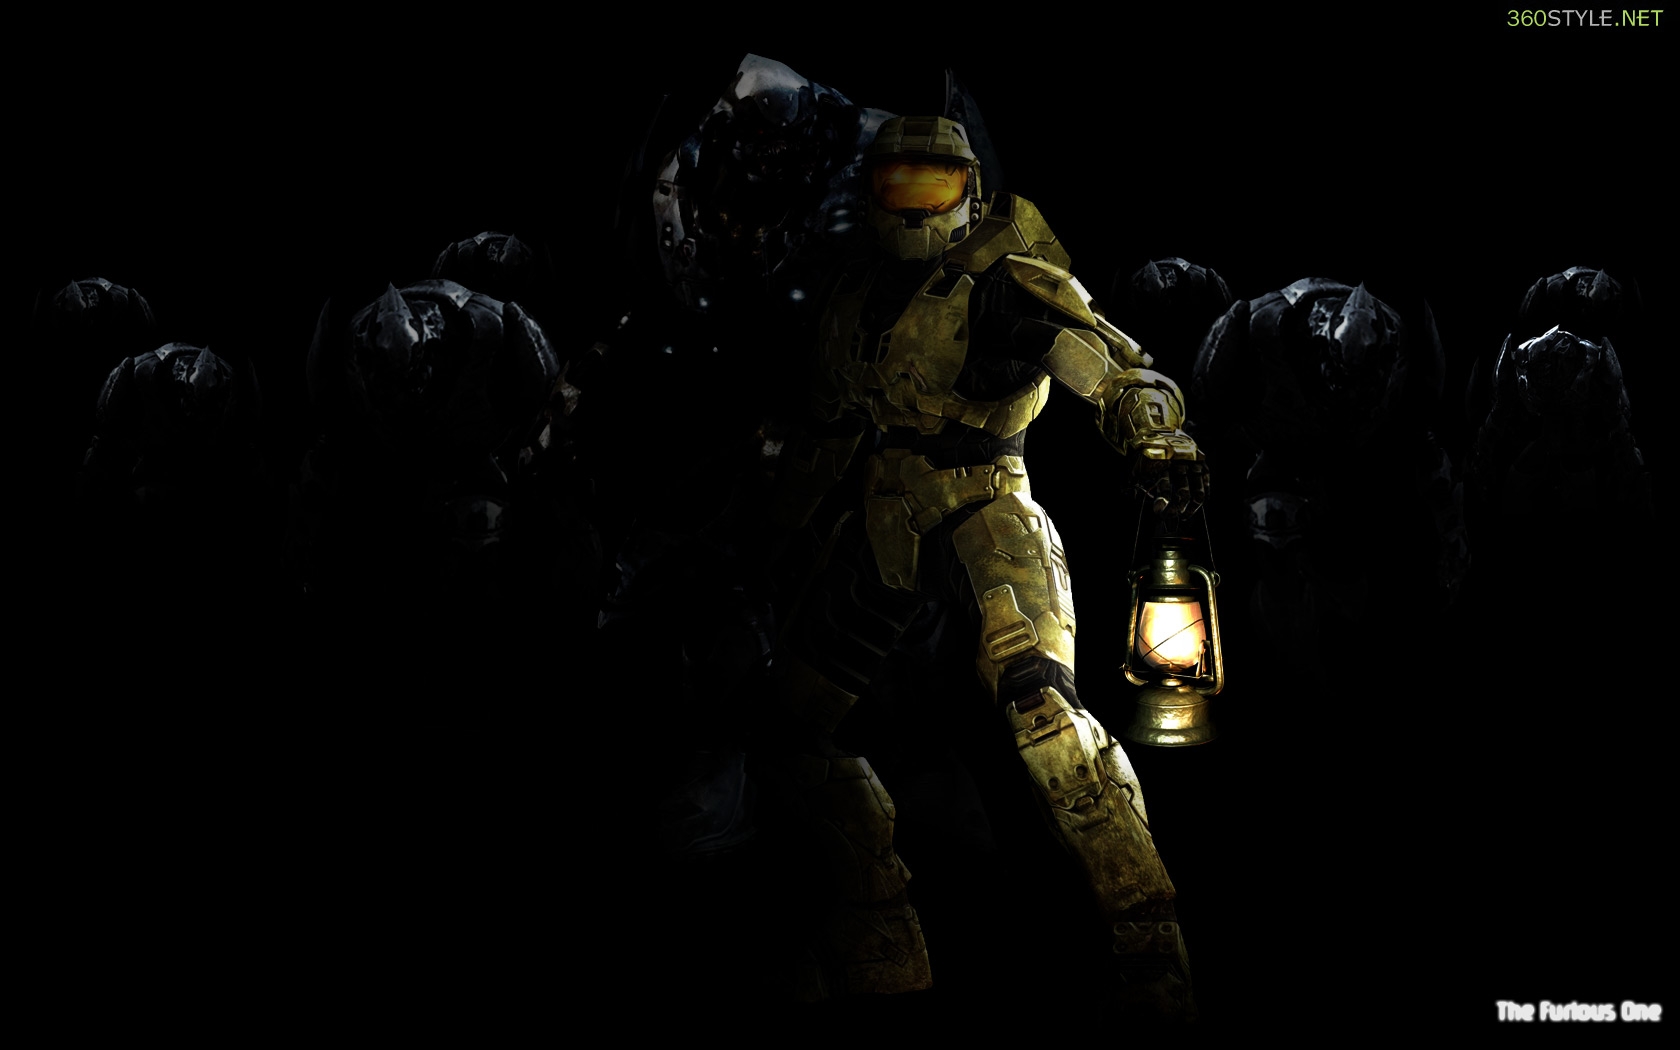 Master Chief standing strong in high-definition desktop wallpaper.